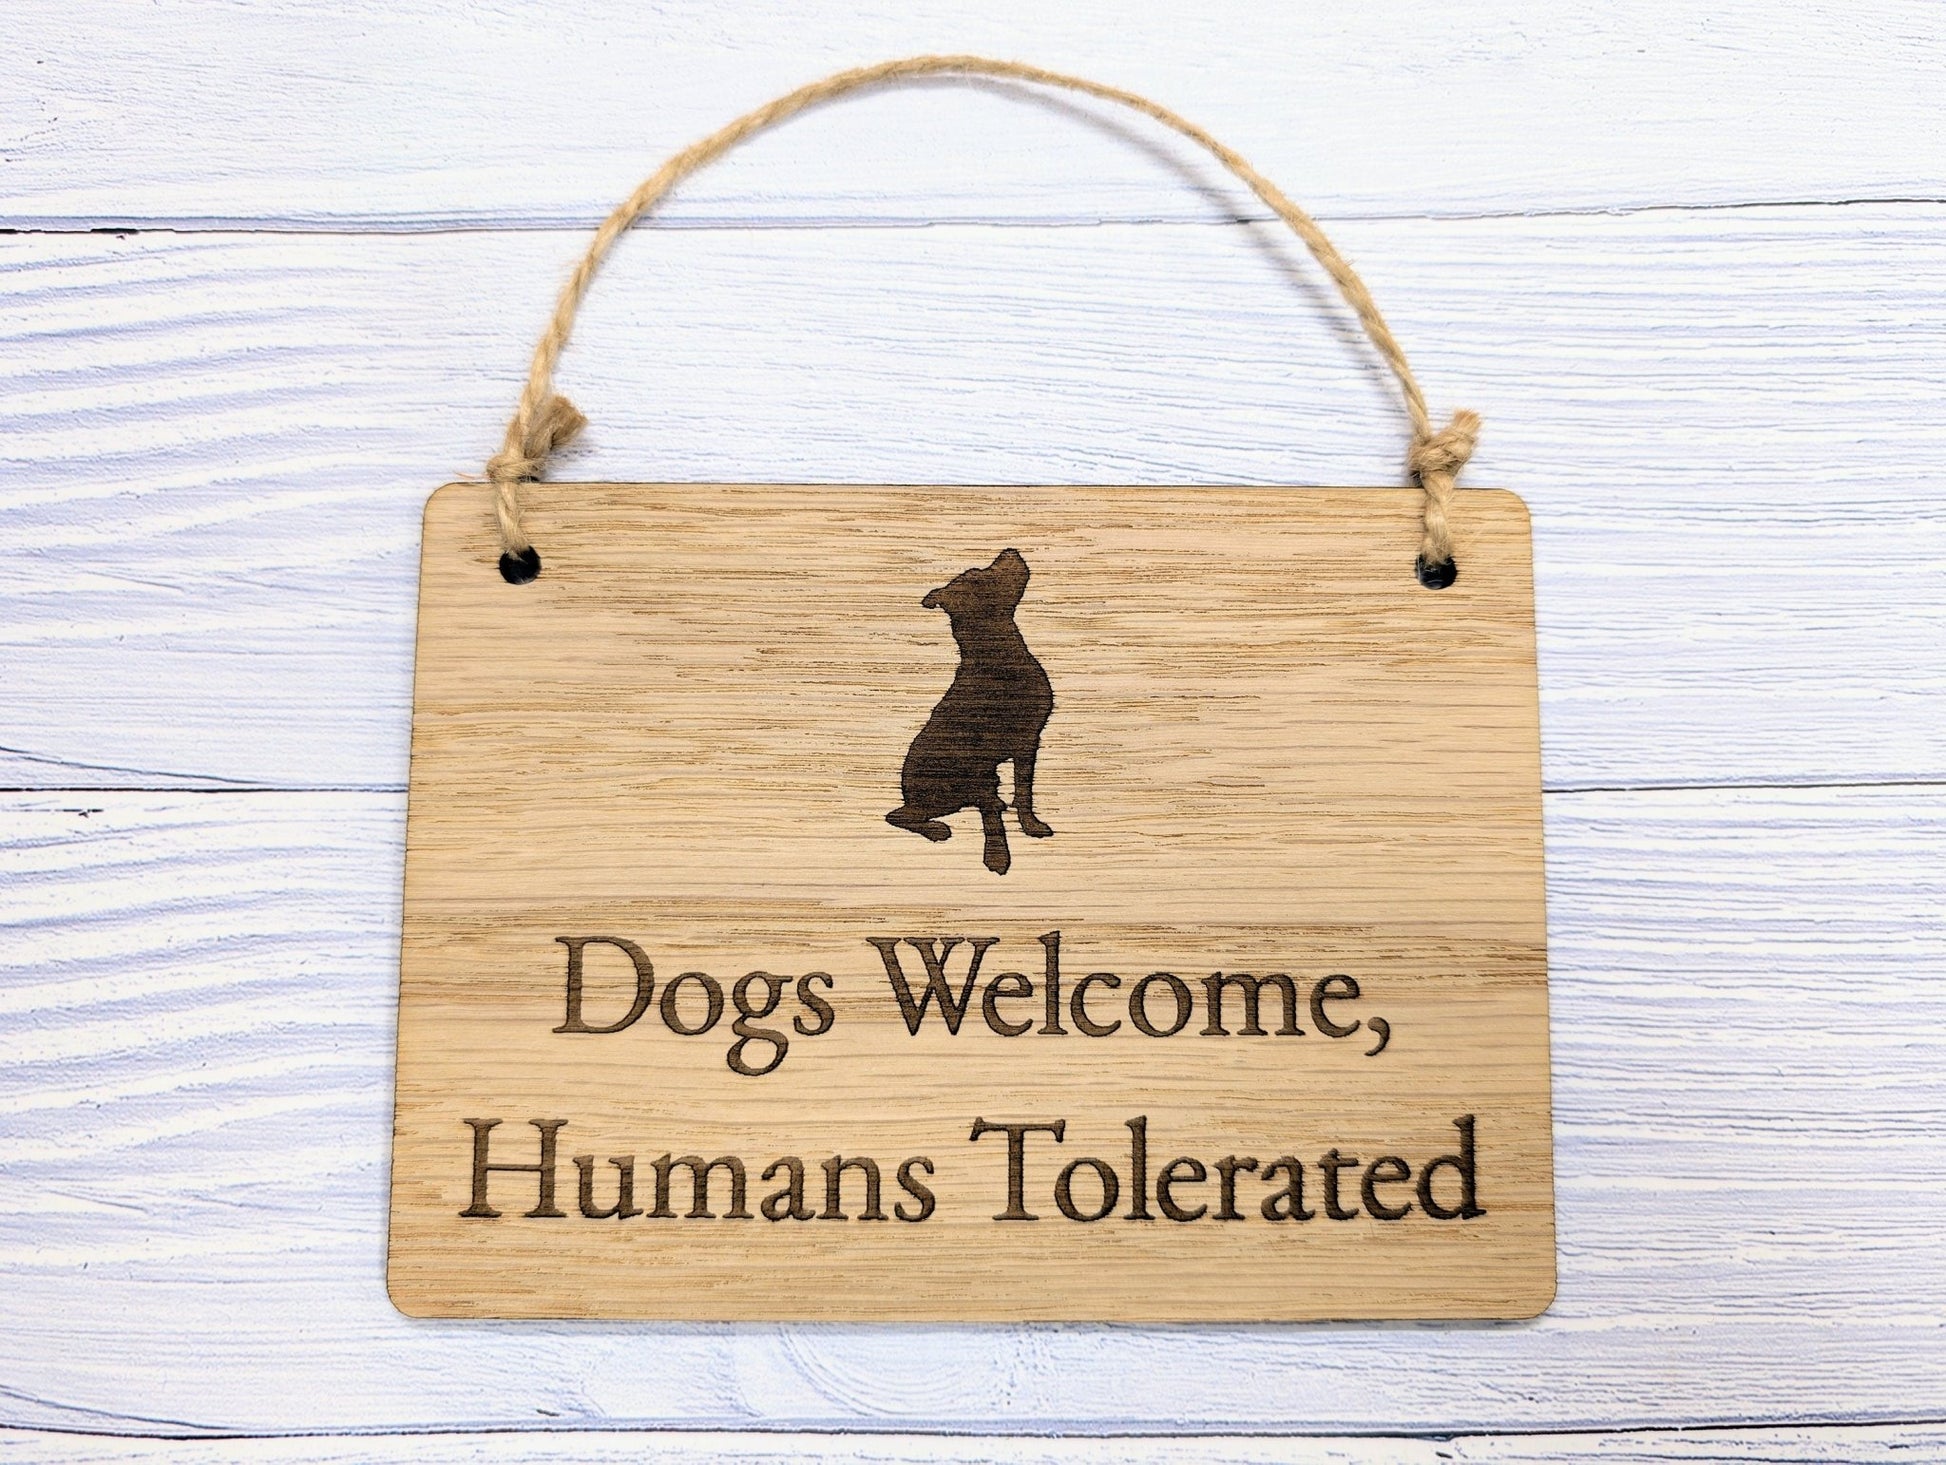 Humorous Dog-Friendly Wooden Sign - "Dogs Welcome, Humans Tolerated" - Perfect for Dog Lovers, Cafes, and Pet Shops | Indoor Sign - CherryGroveCraft